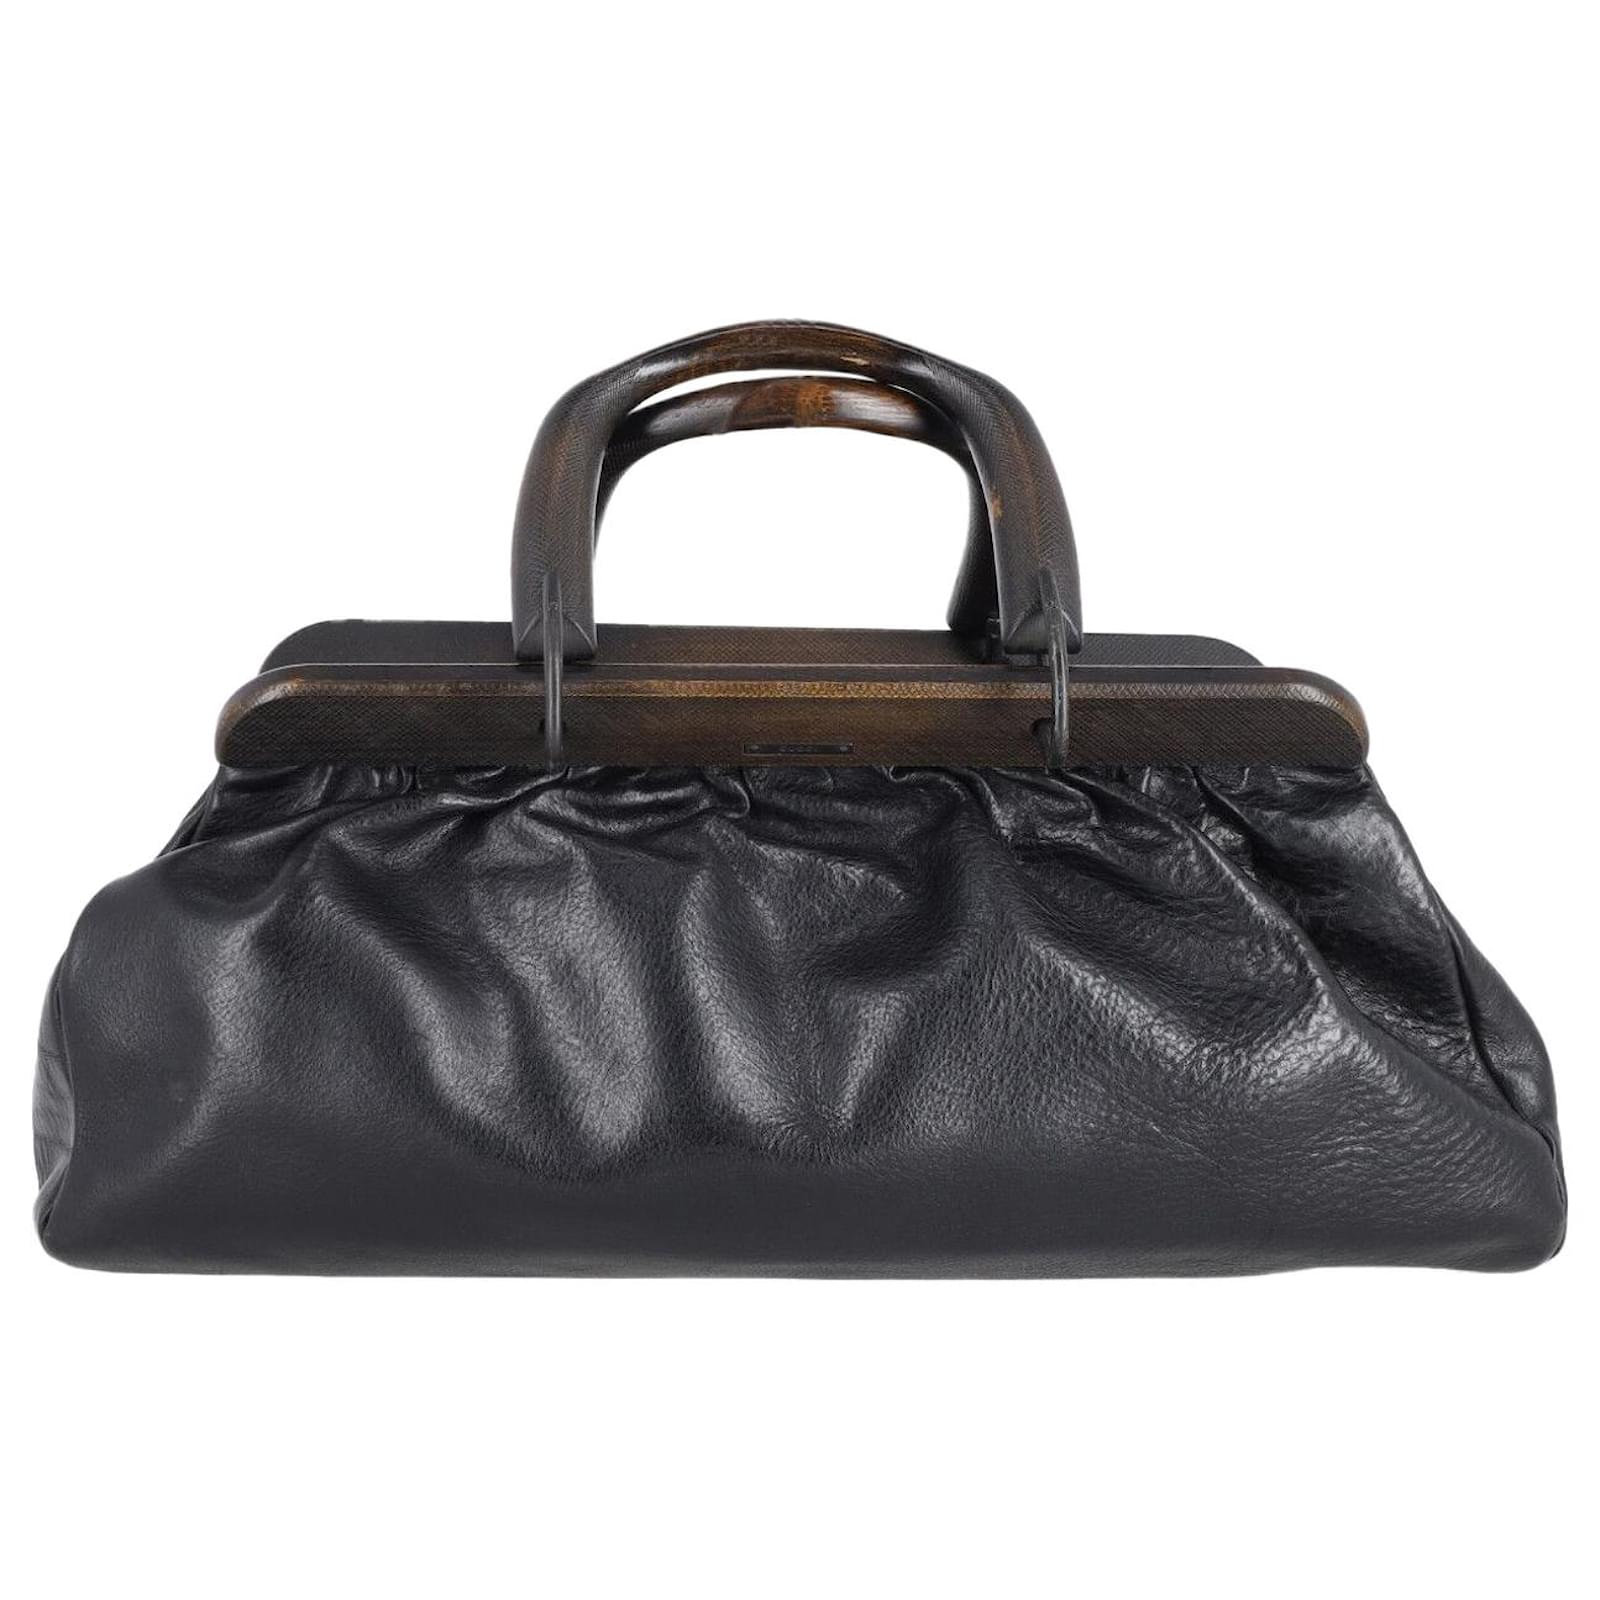 Gucci – Doctor bag by Tom Ford in buffalo leather with wooden handles.